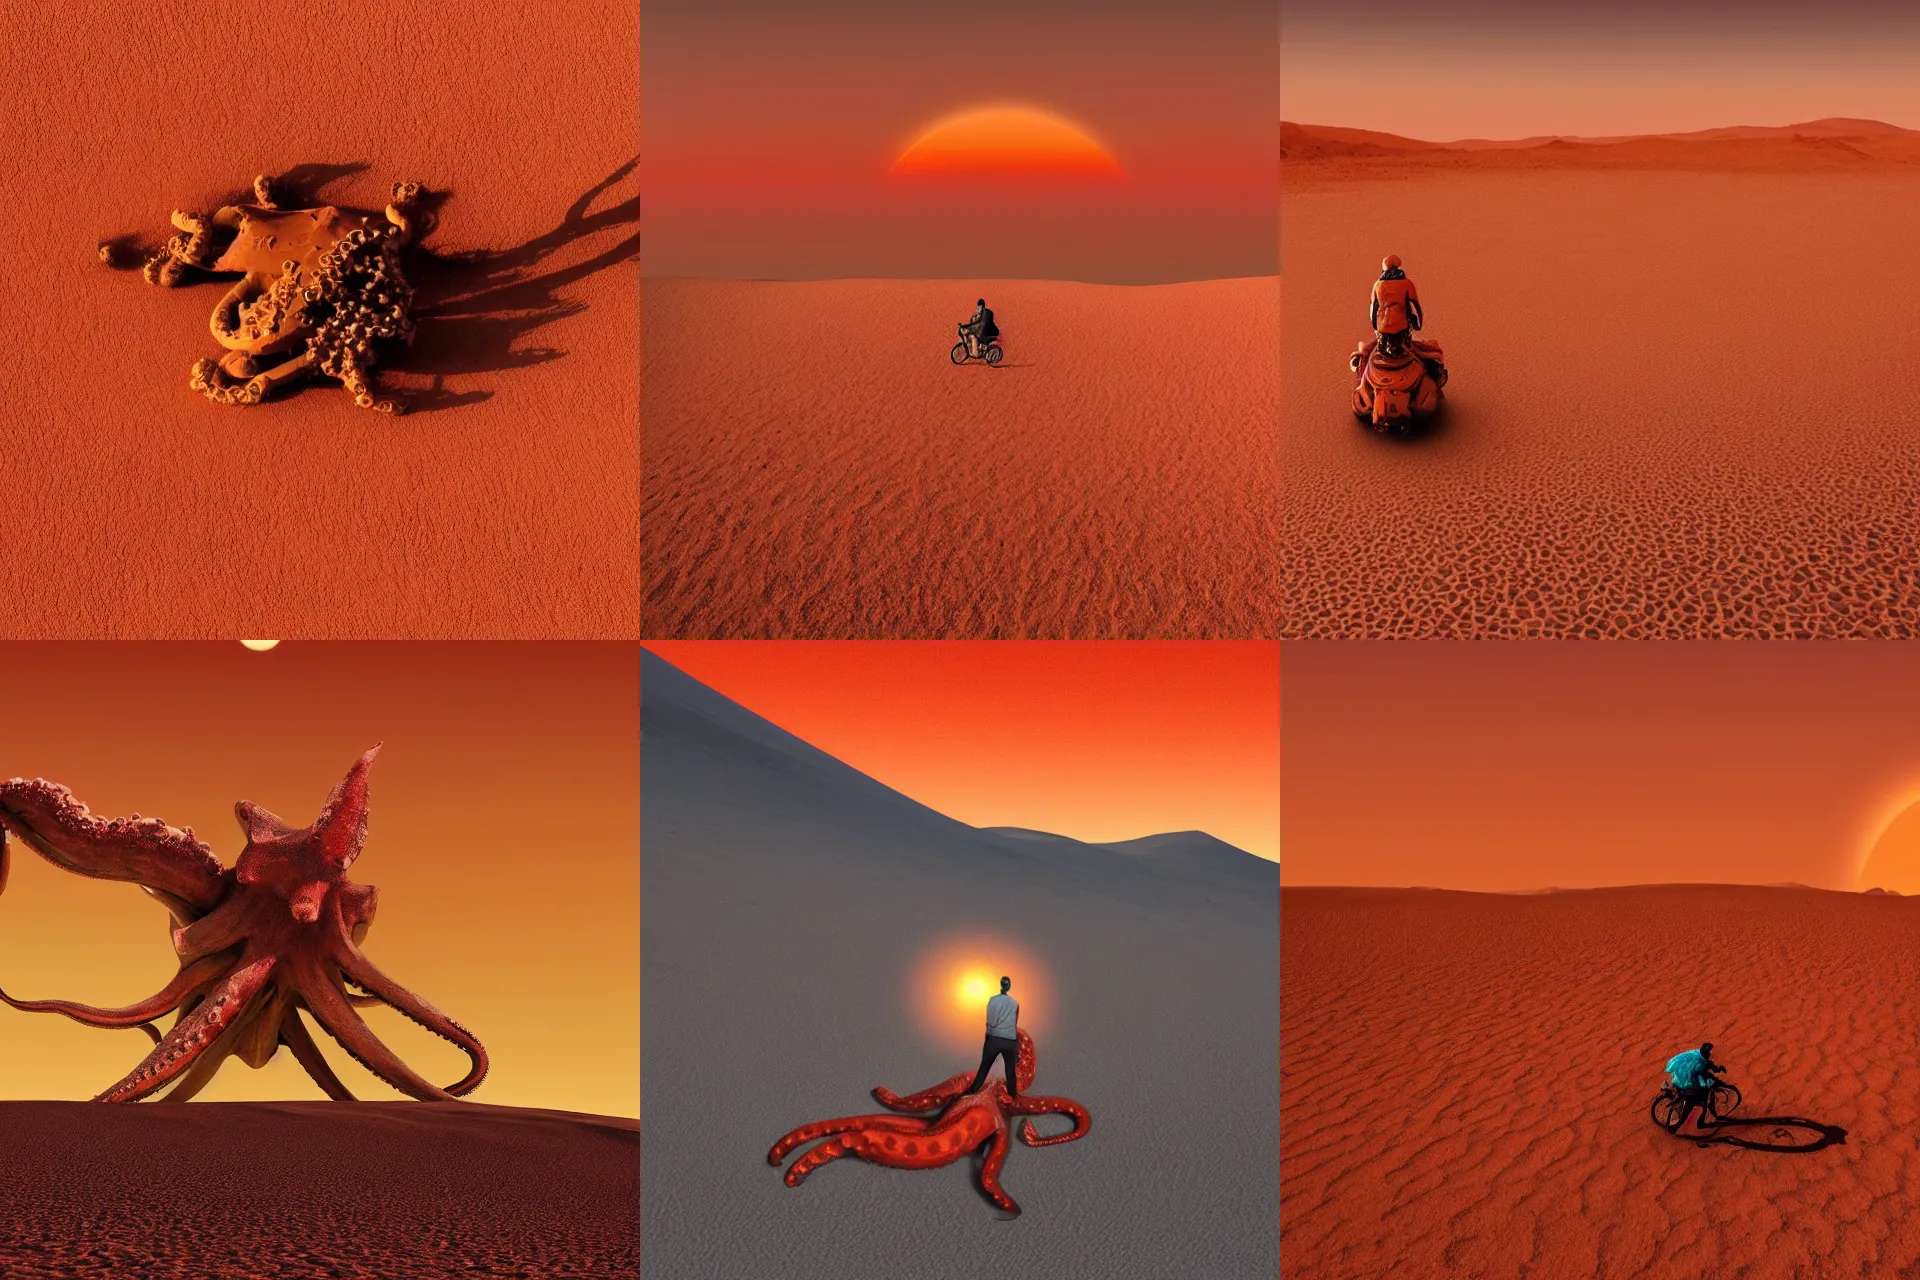 Prompt: A man riding a giant octopus on the desert dunes of the mars surface with an red orange sky in the background